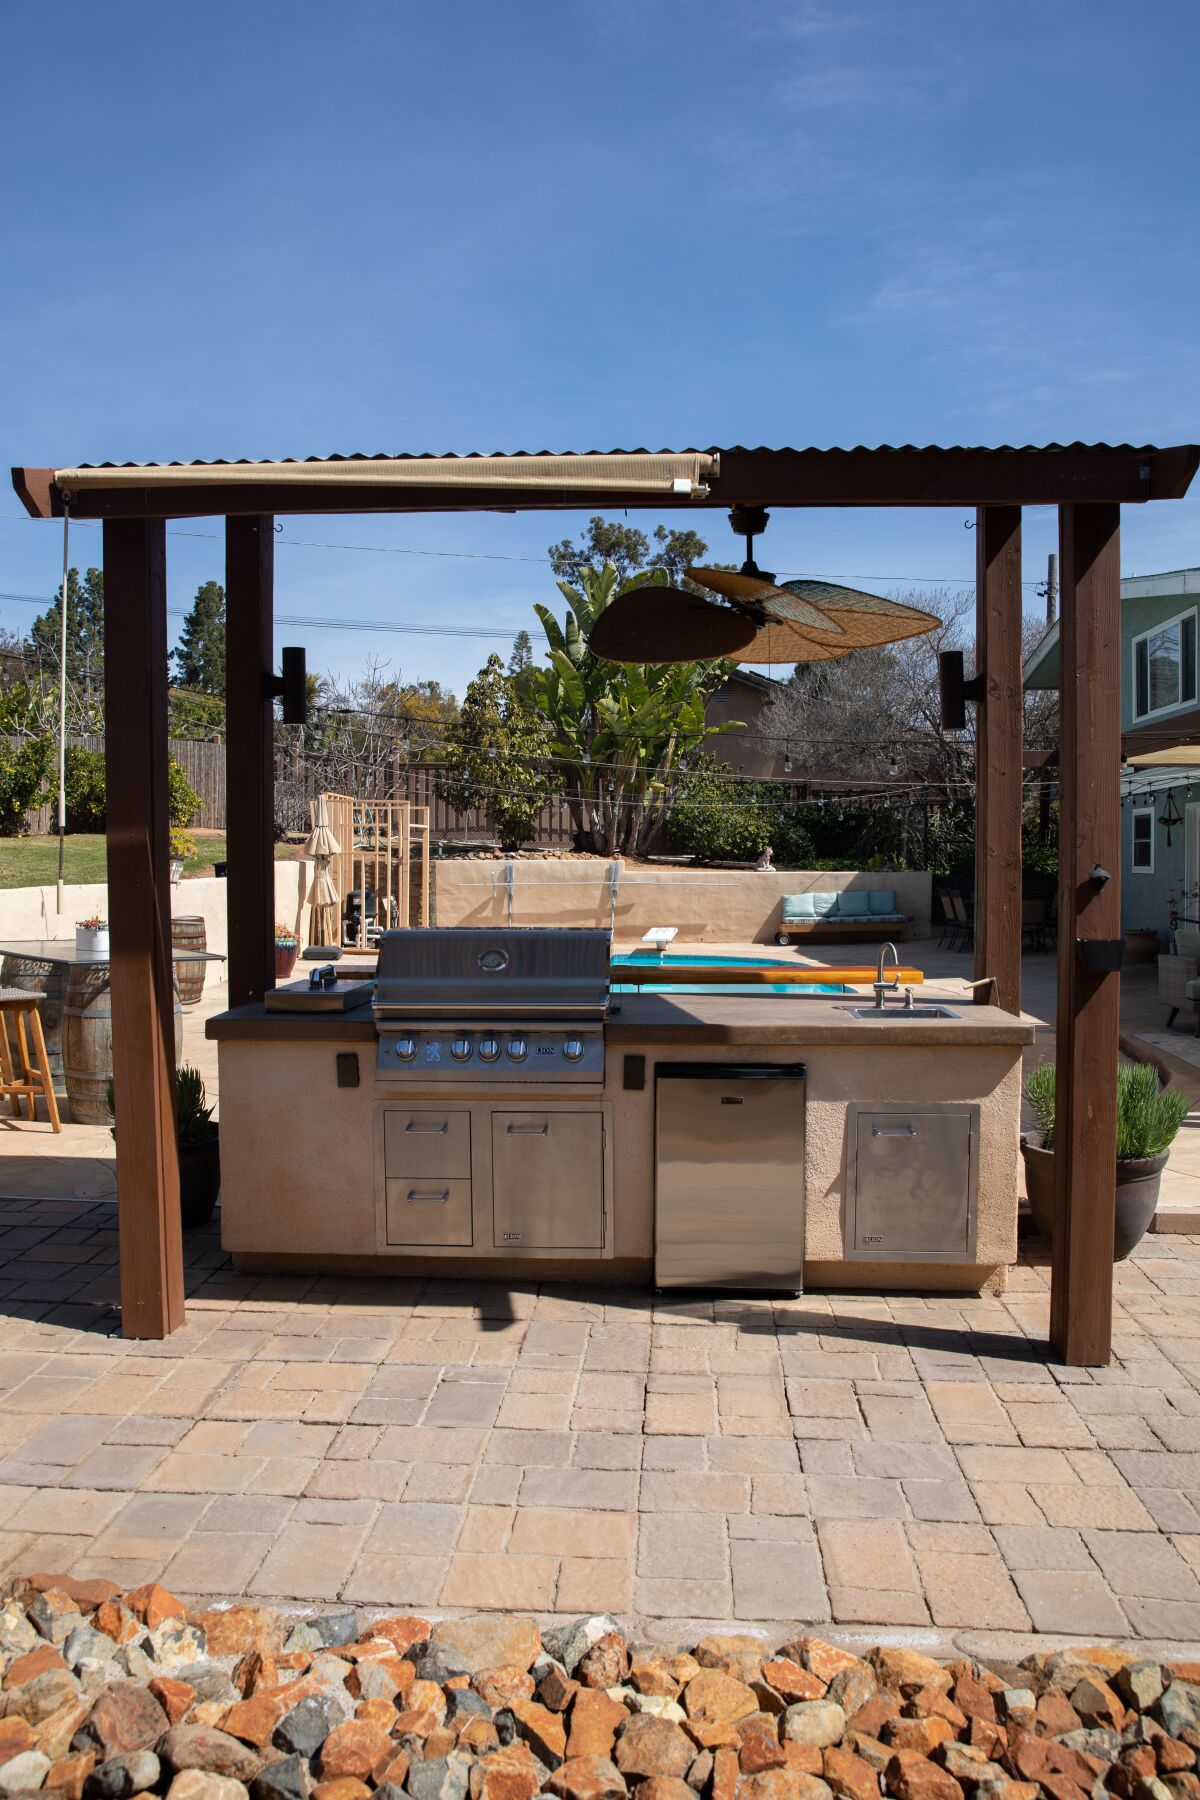 A remodeled outdoor kitchen, showing the side with grill, counter and refrigerator.